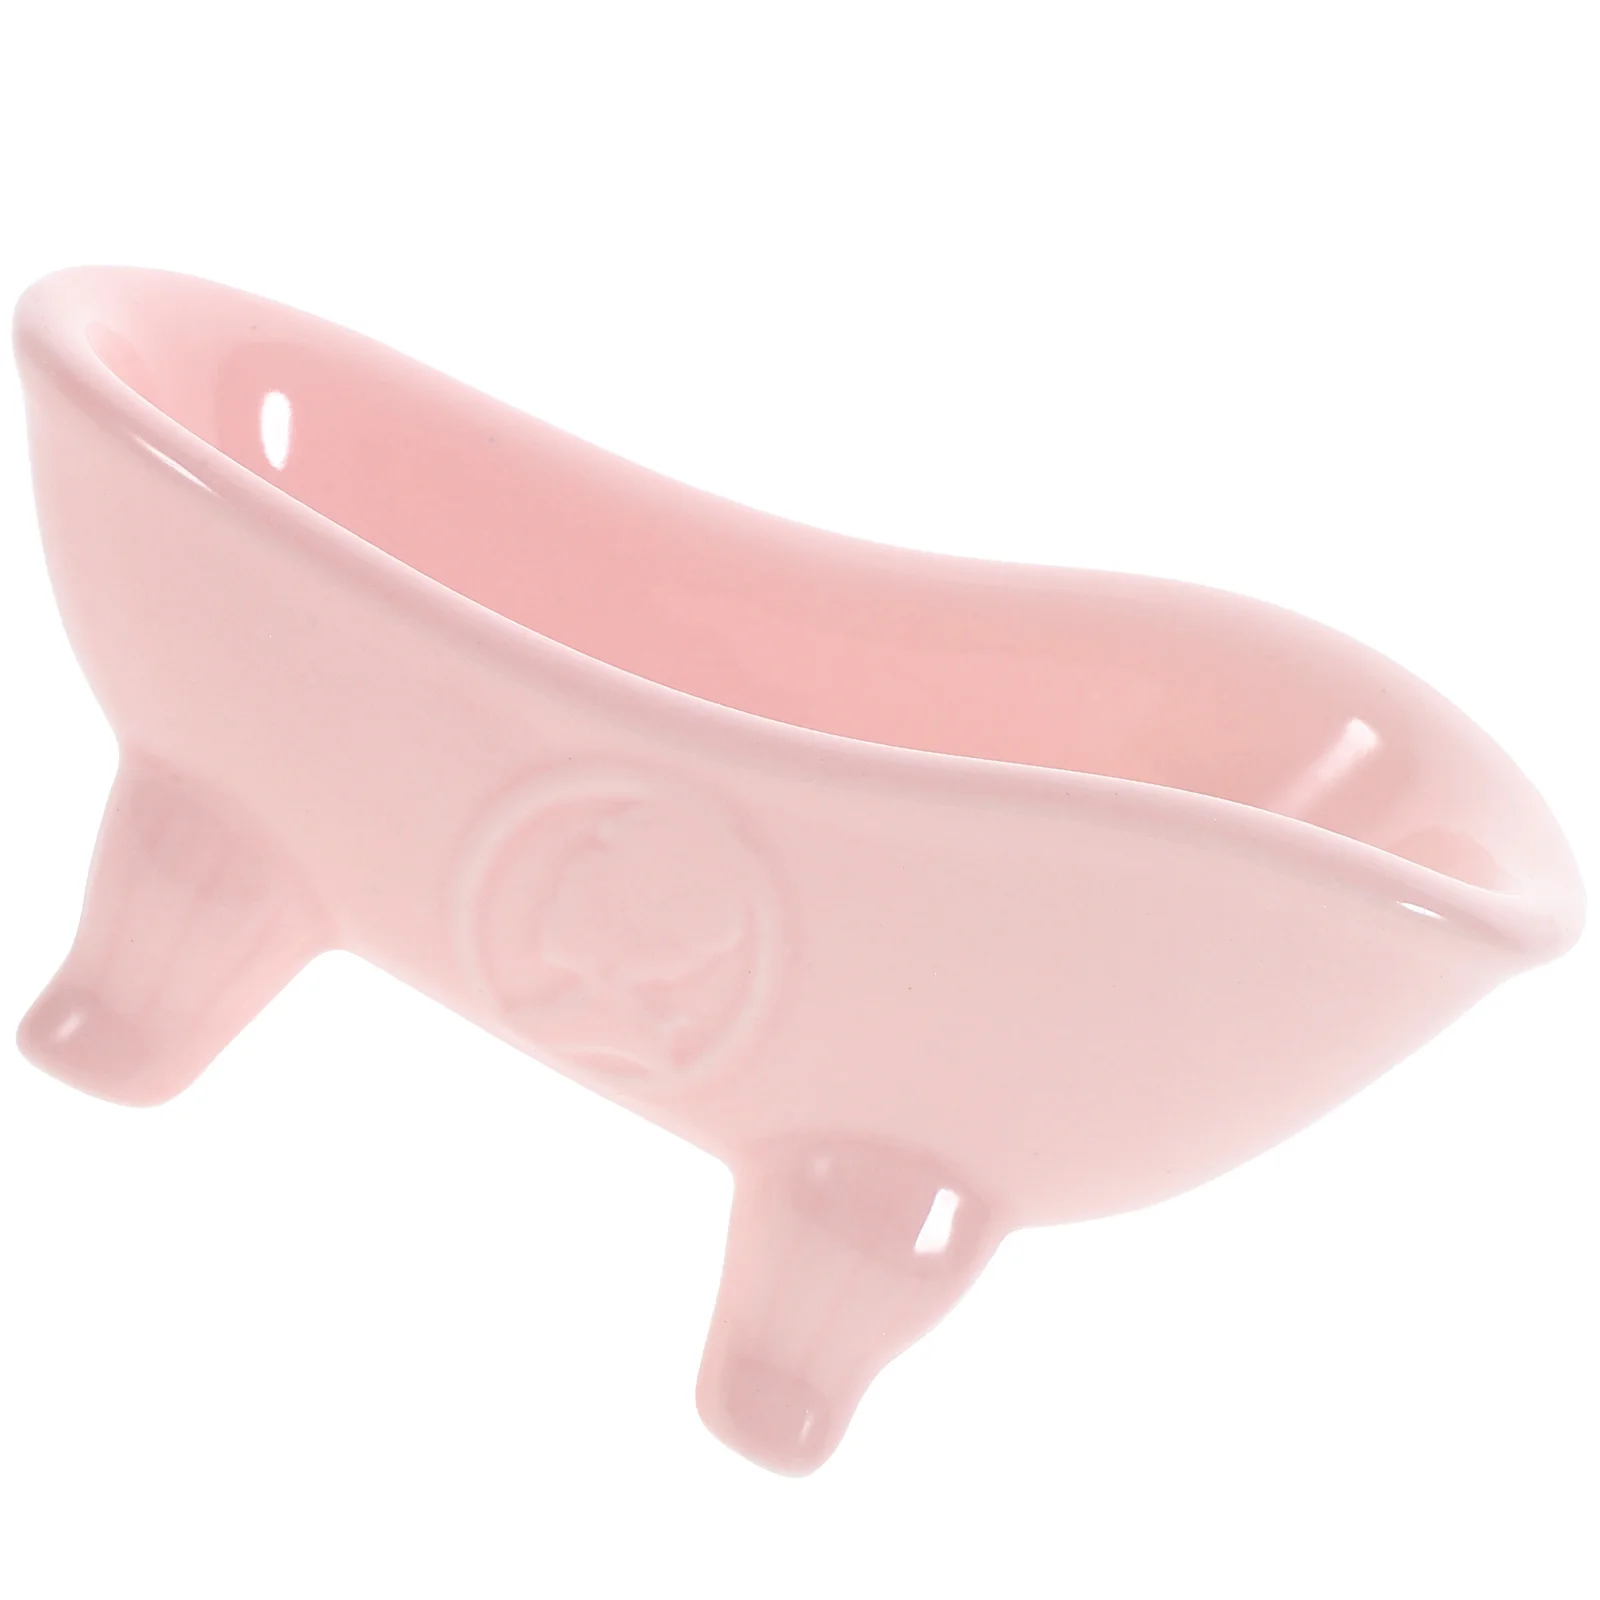 

Soap Dish For Shower Bathtub Container And Body Holder Ceramic Holders Draining Bathroom Dishes Decorative